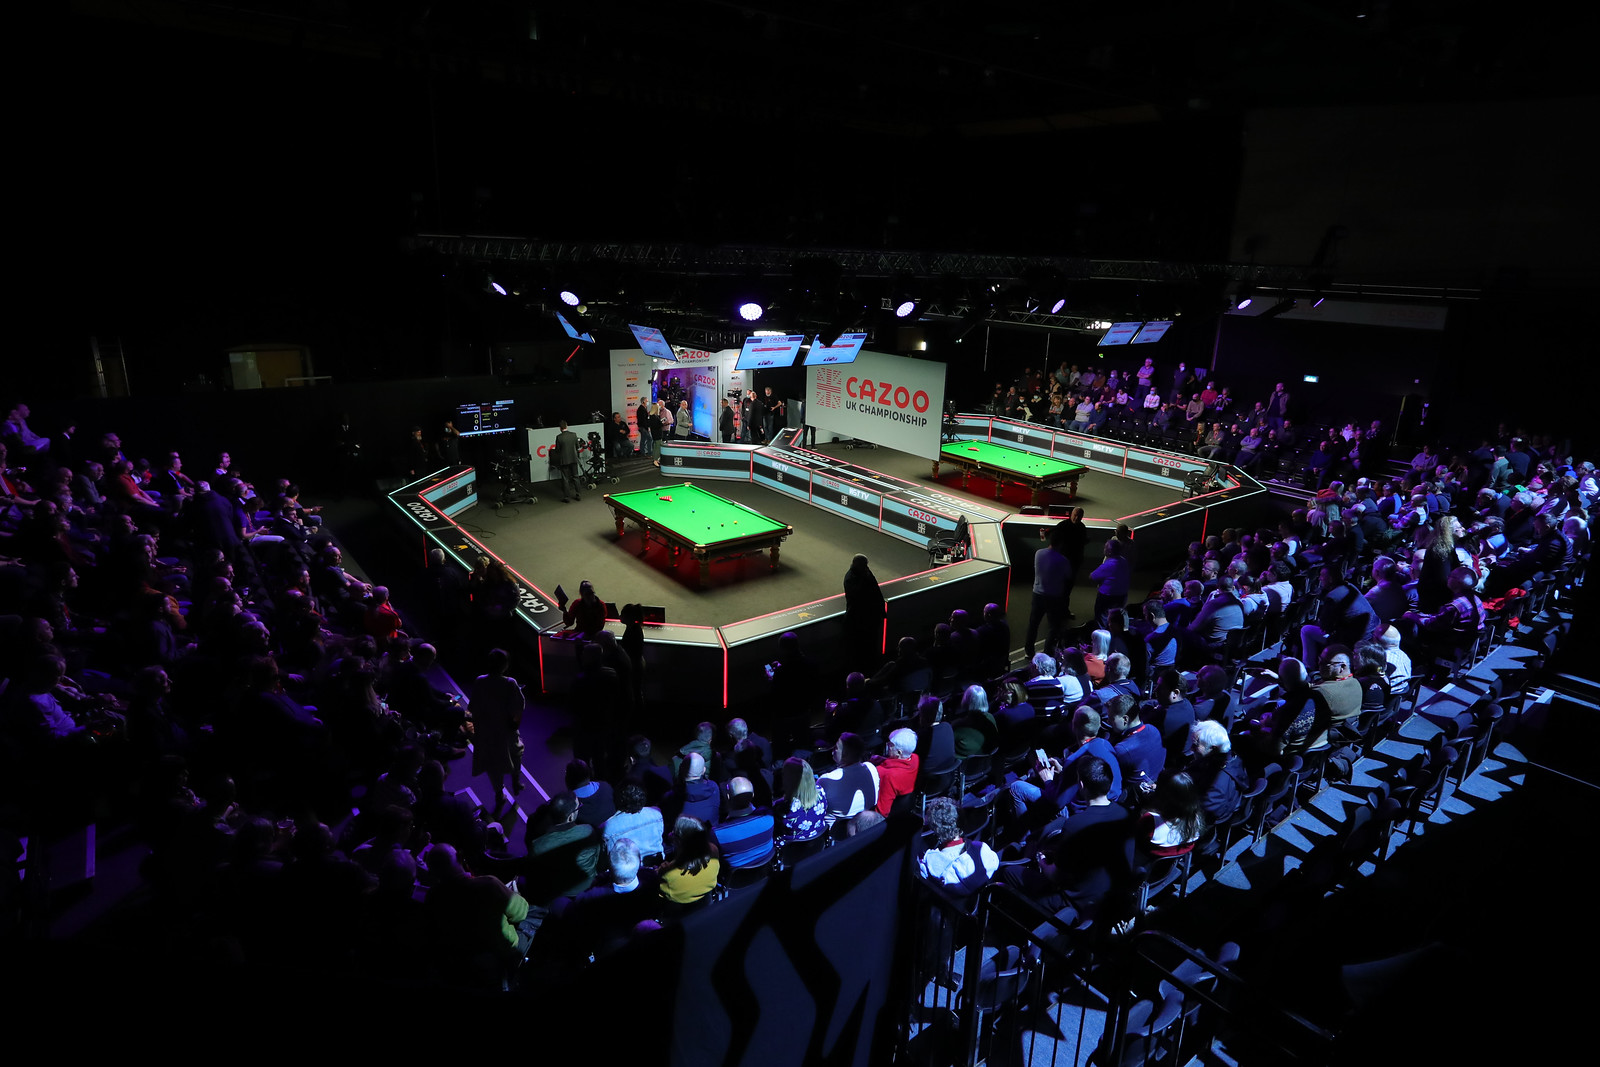 the masters 2023 snooker